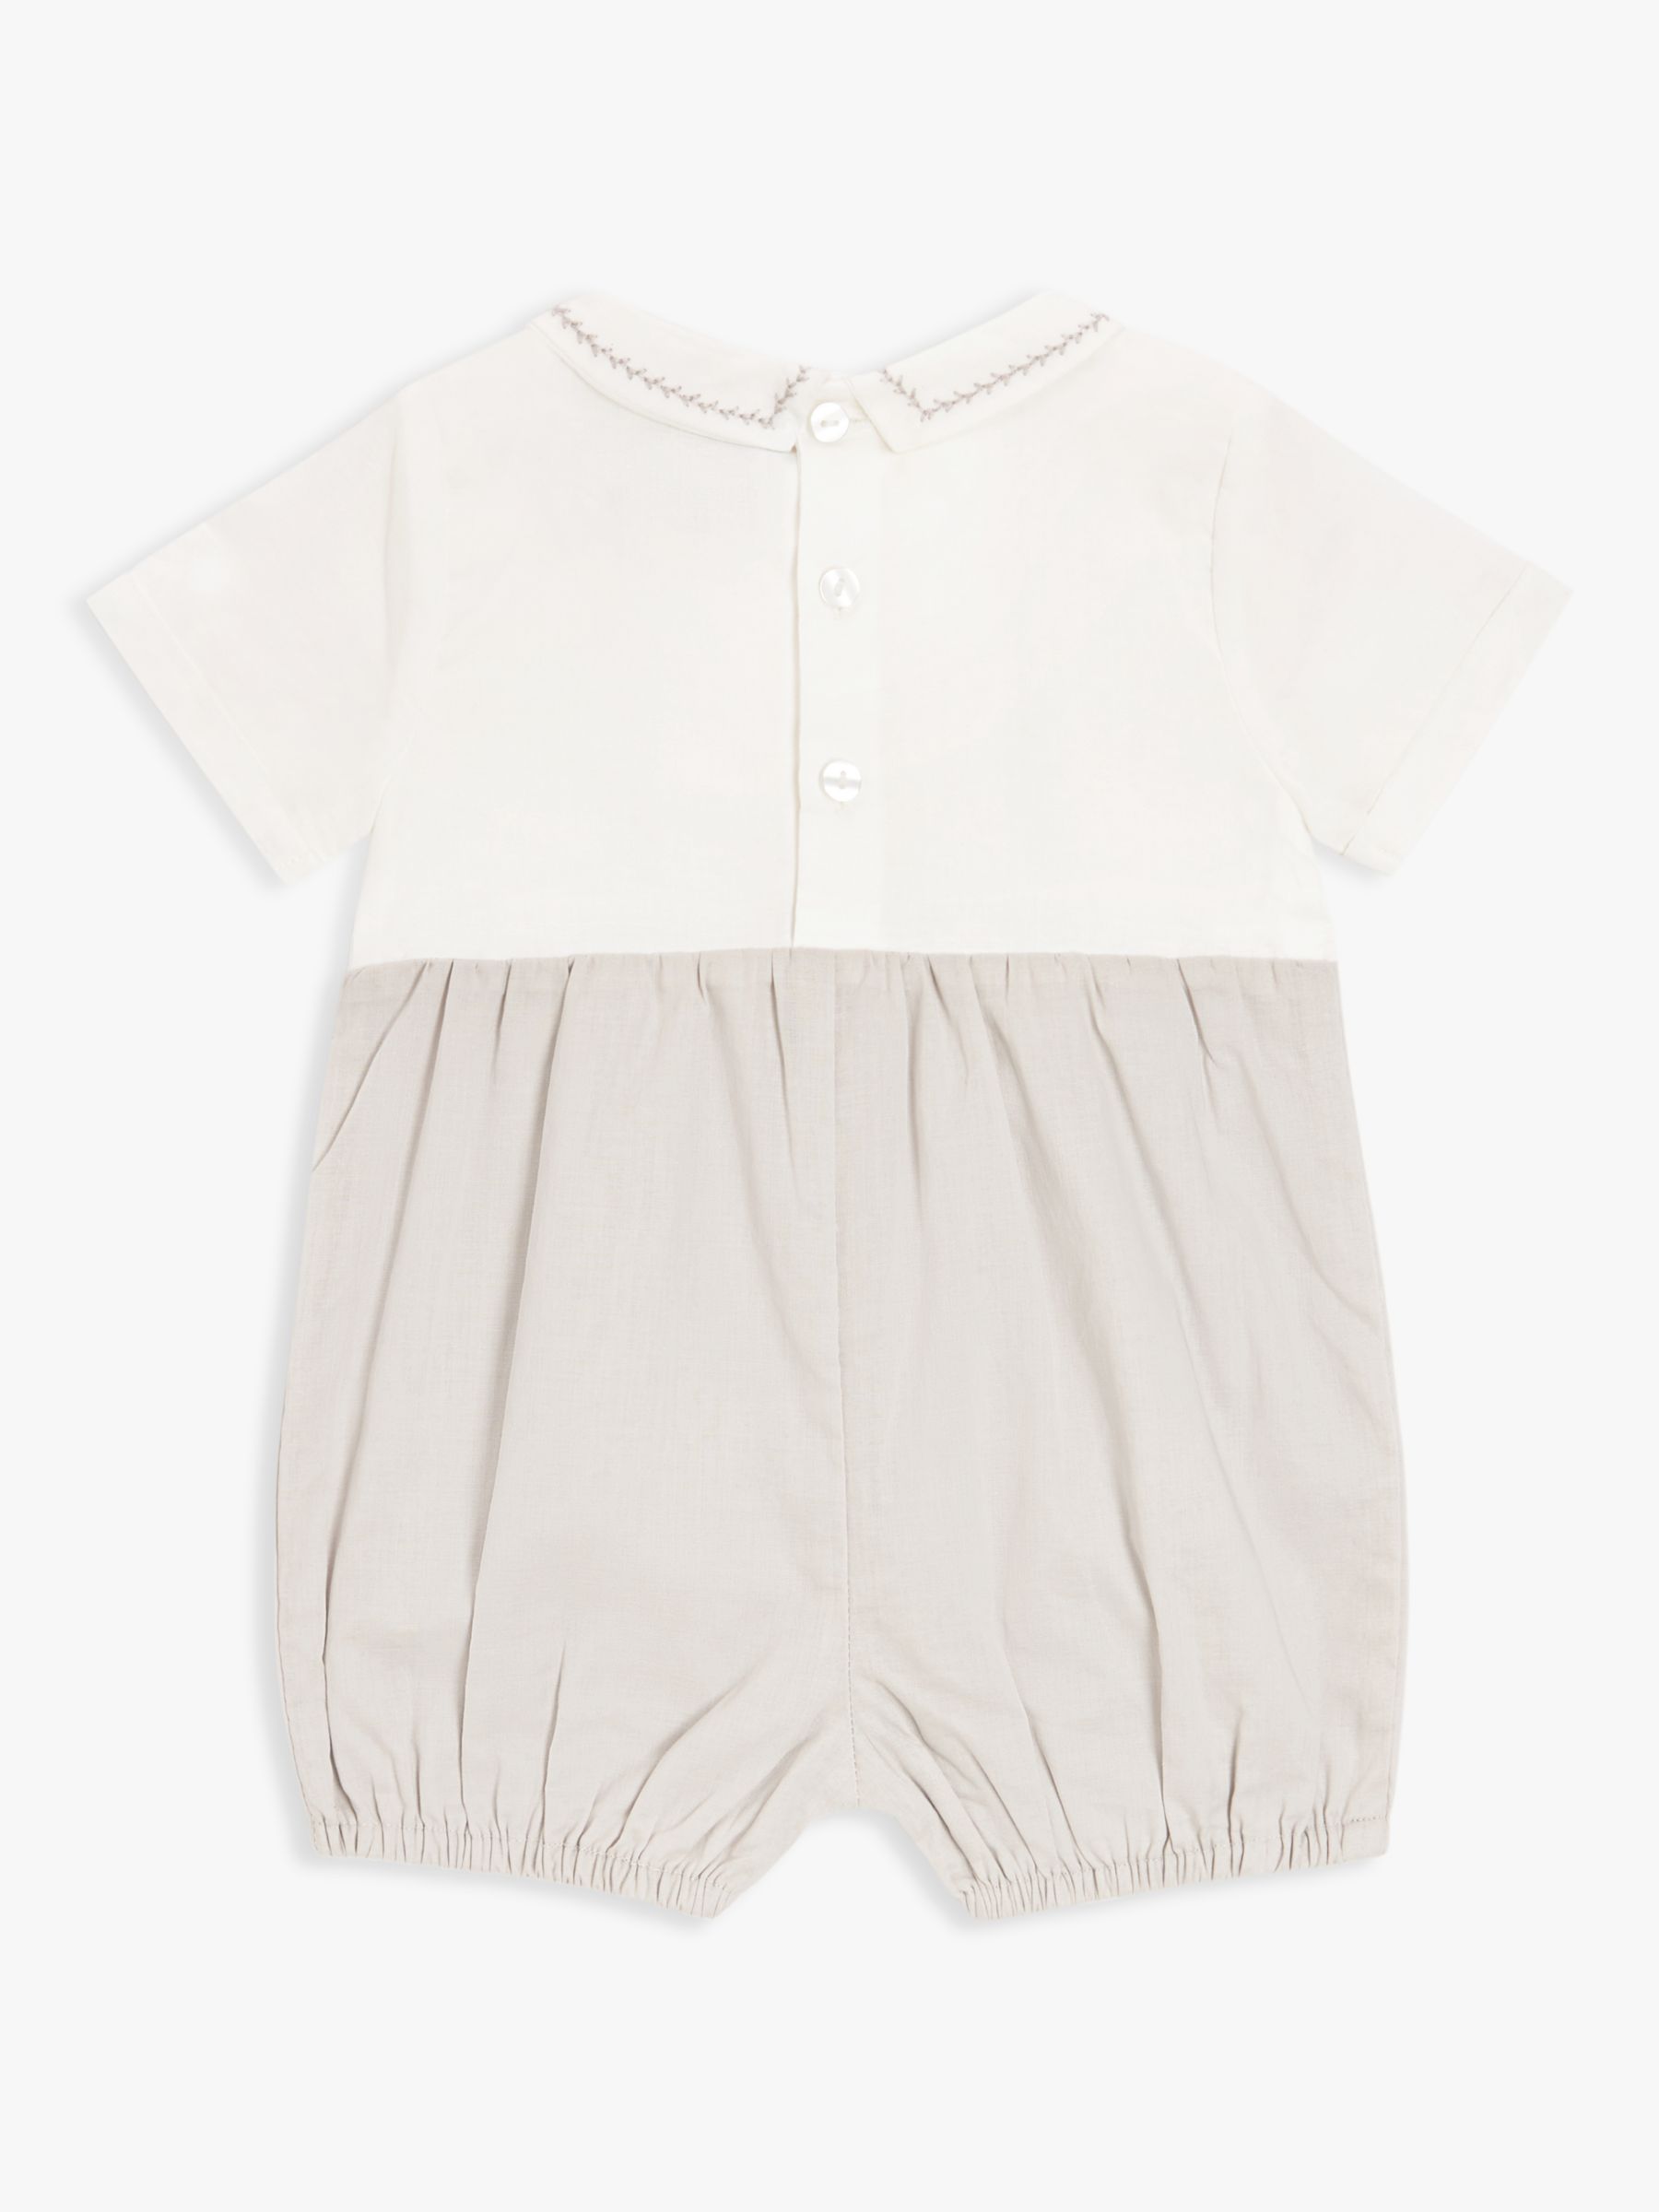 John Lewis Heirloom Collection Baby Linen Romper, White, 12-18 months